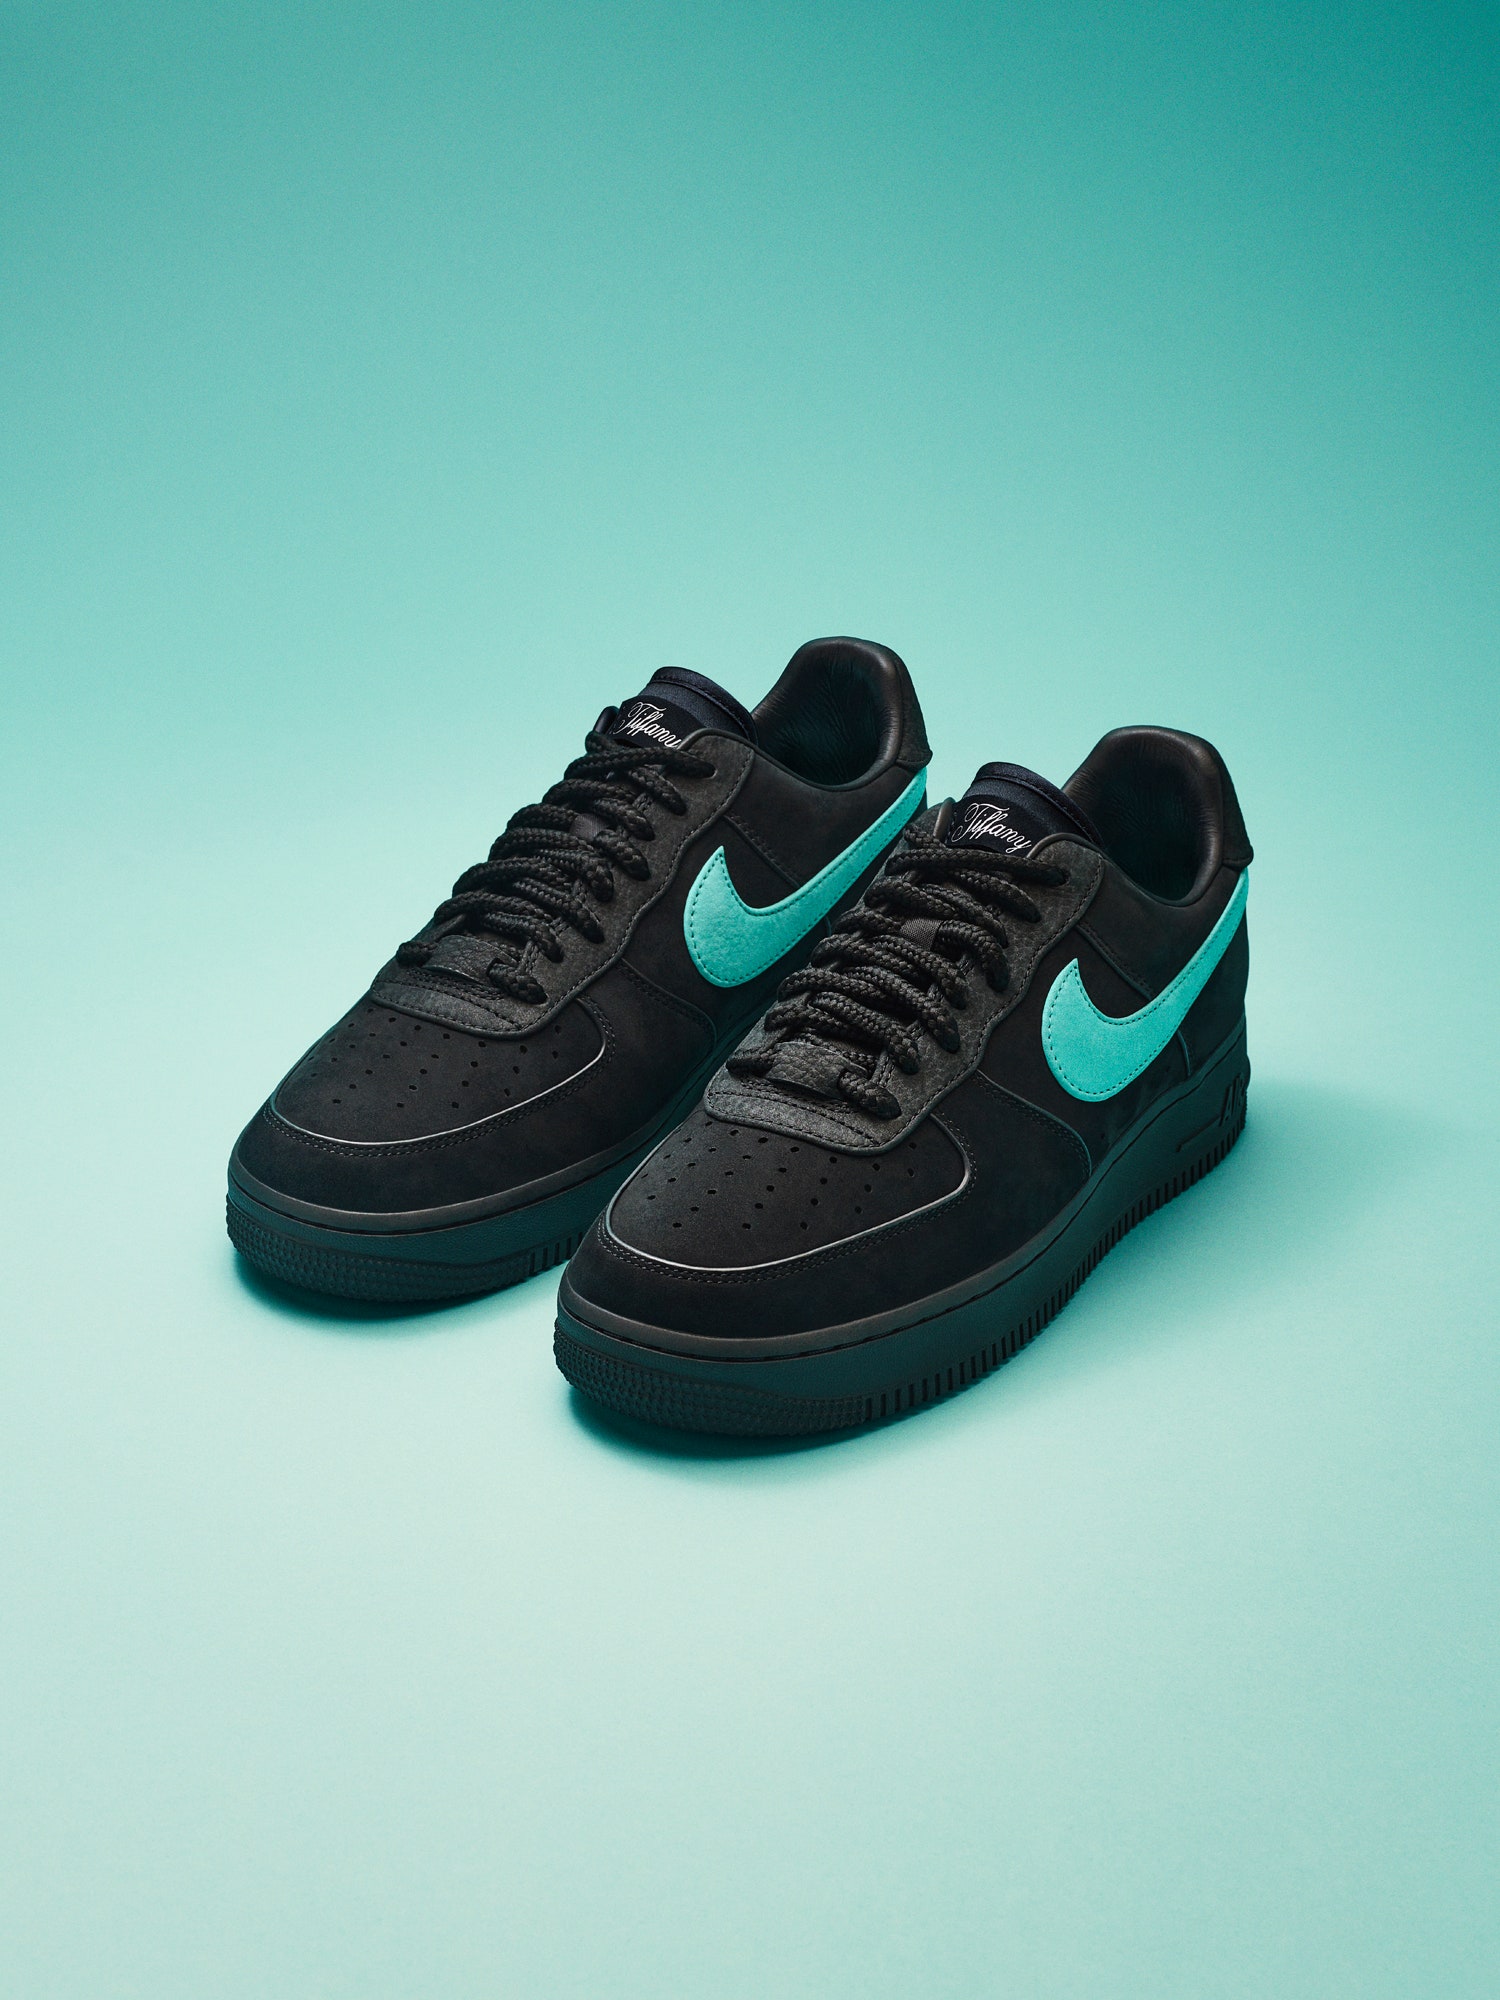 Nike x Tiffany & Co to release Air Force 1 1837 trainers in March